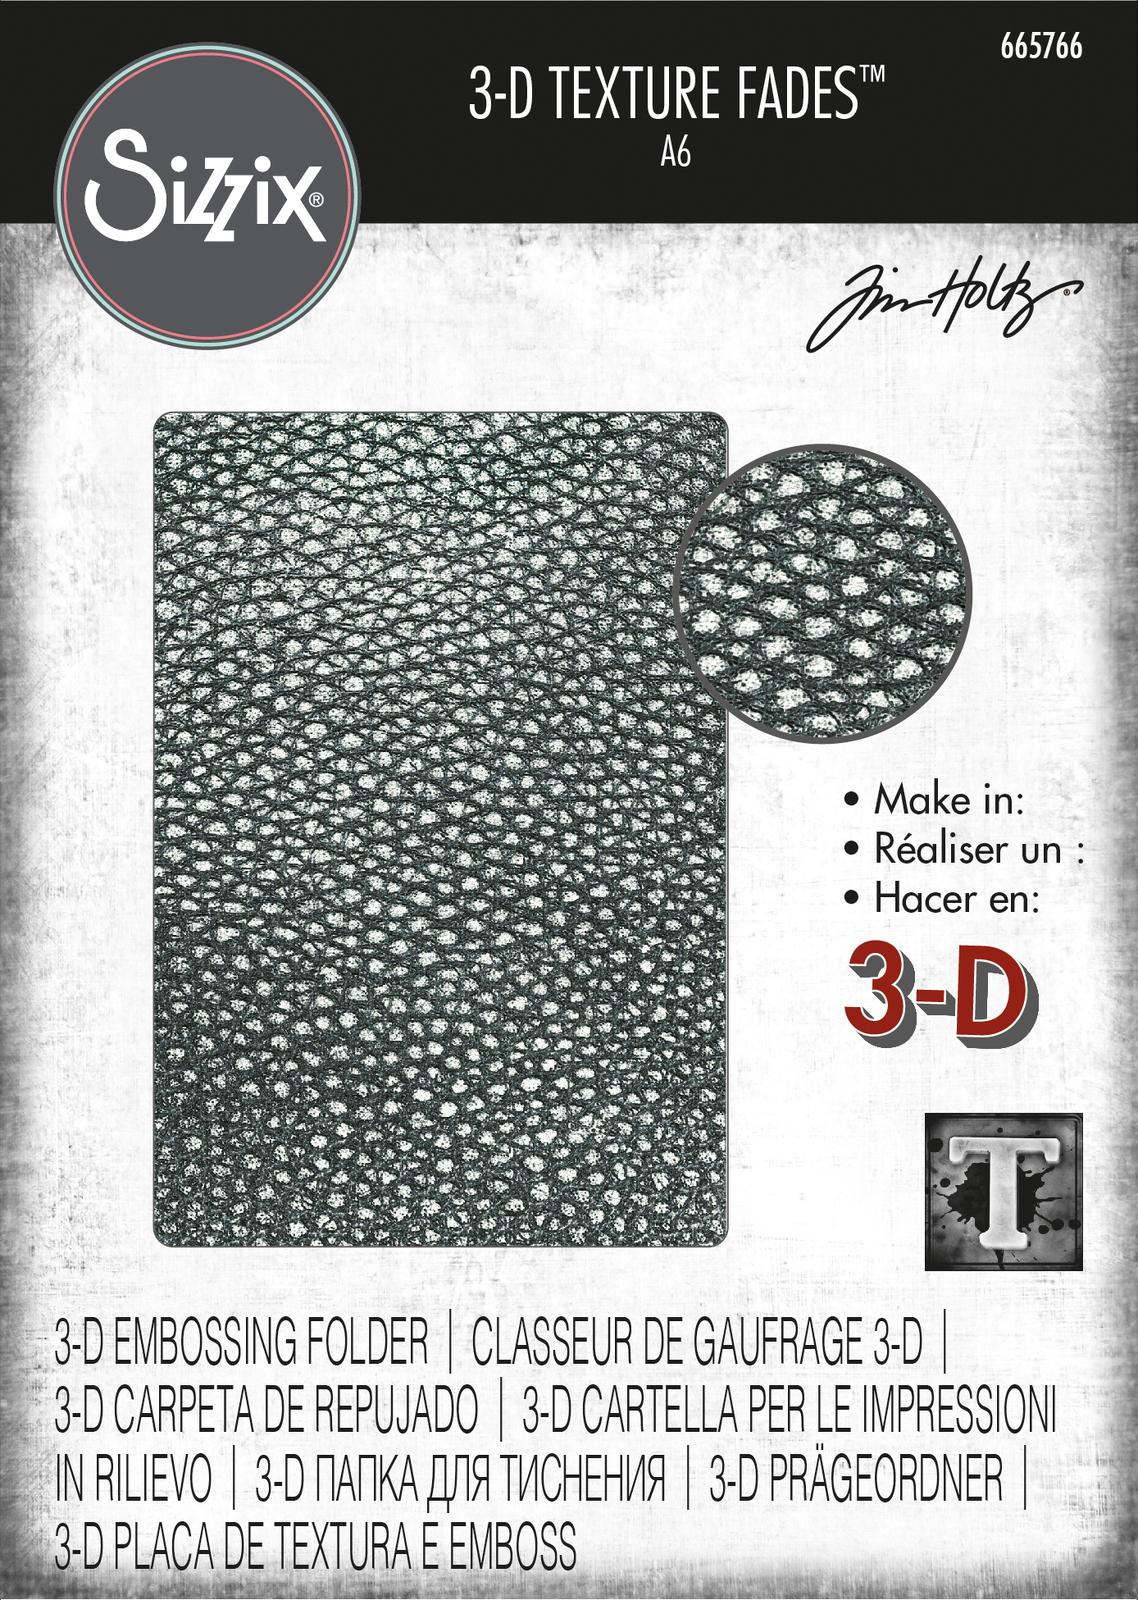 Tim Holtz Cracked Leather 3-D Texture Fades Embossing Folder<br>